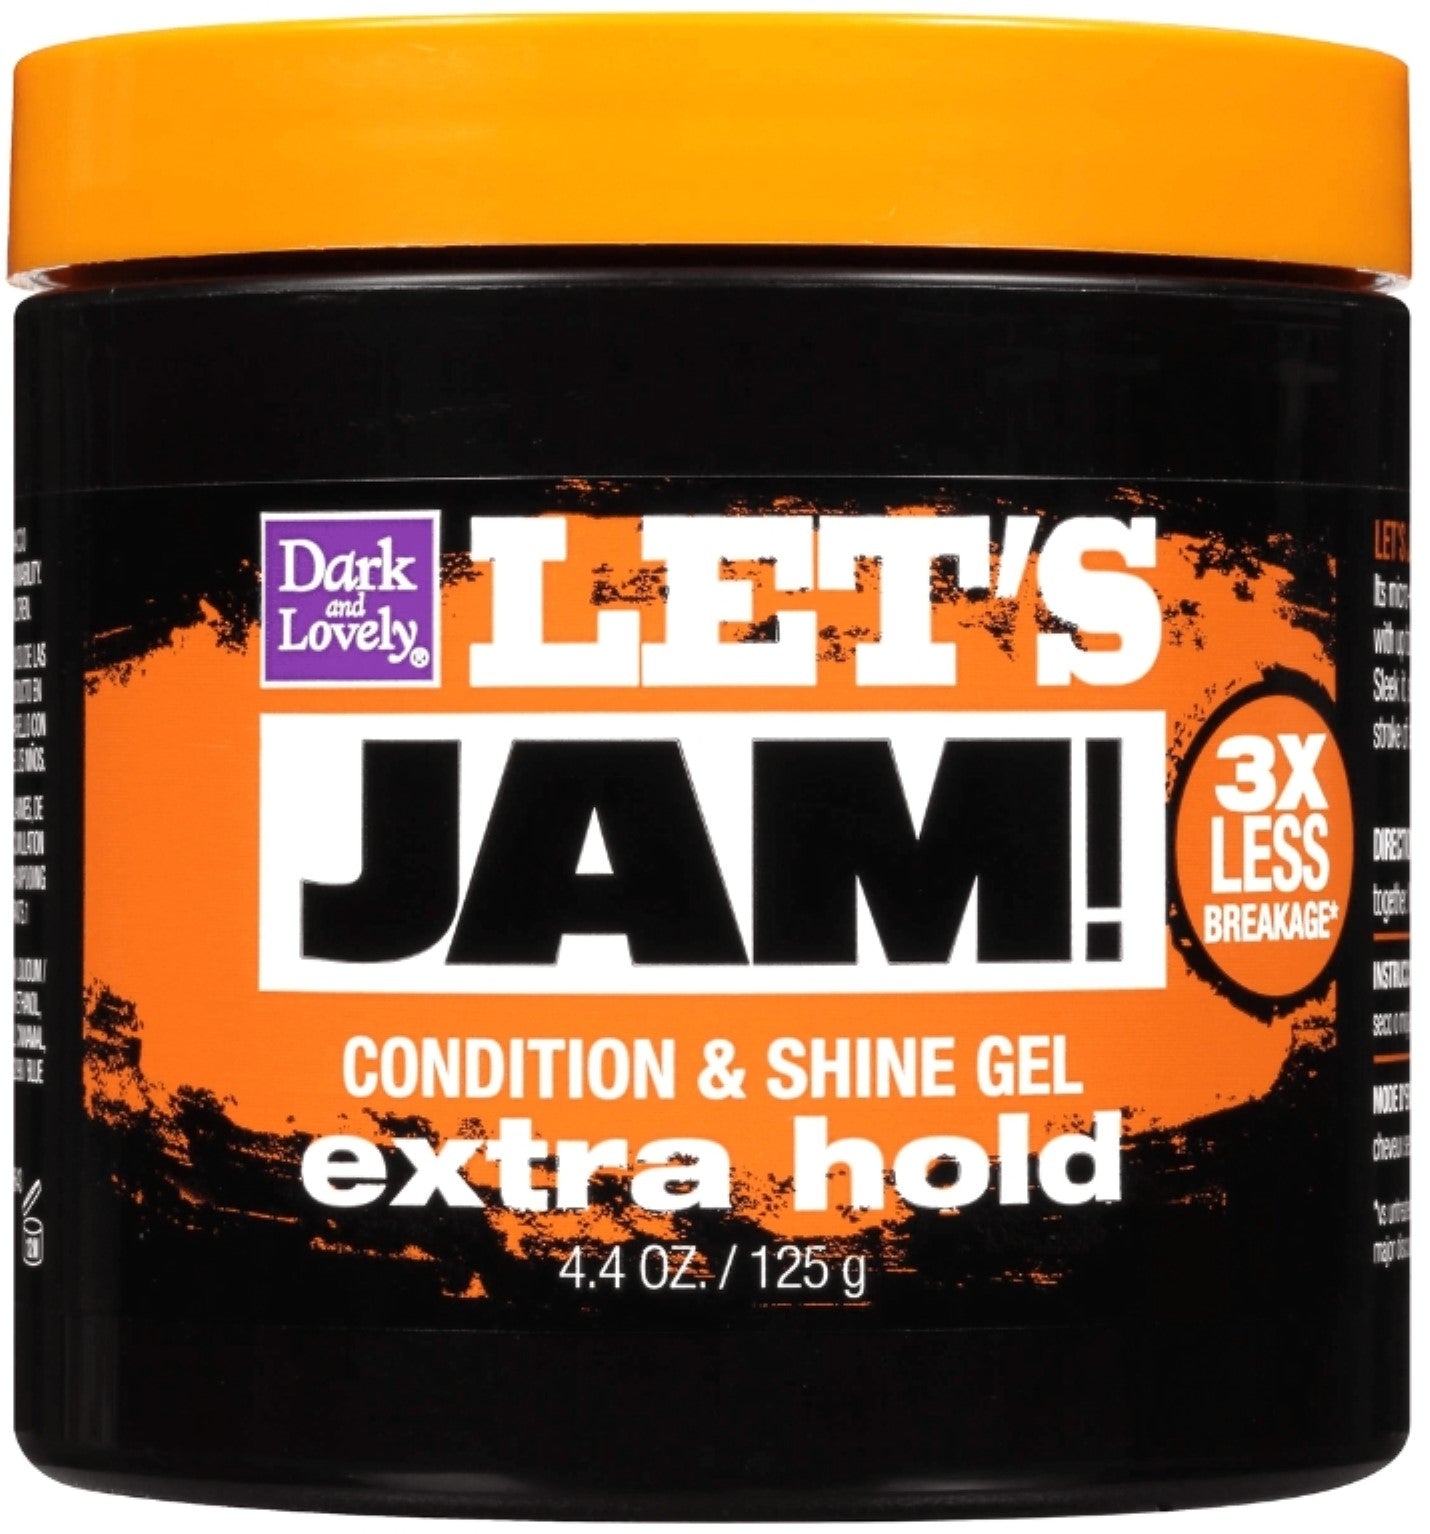 Let's Jam Extra Hold 5.5oz